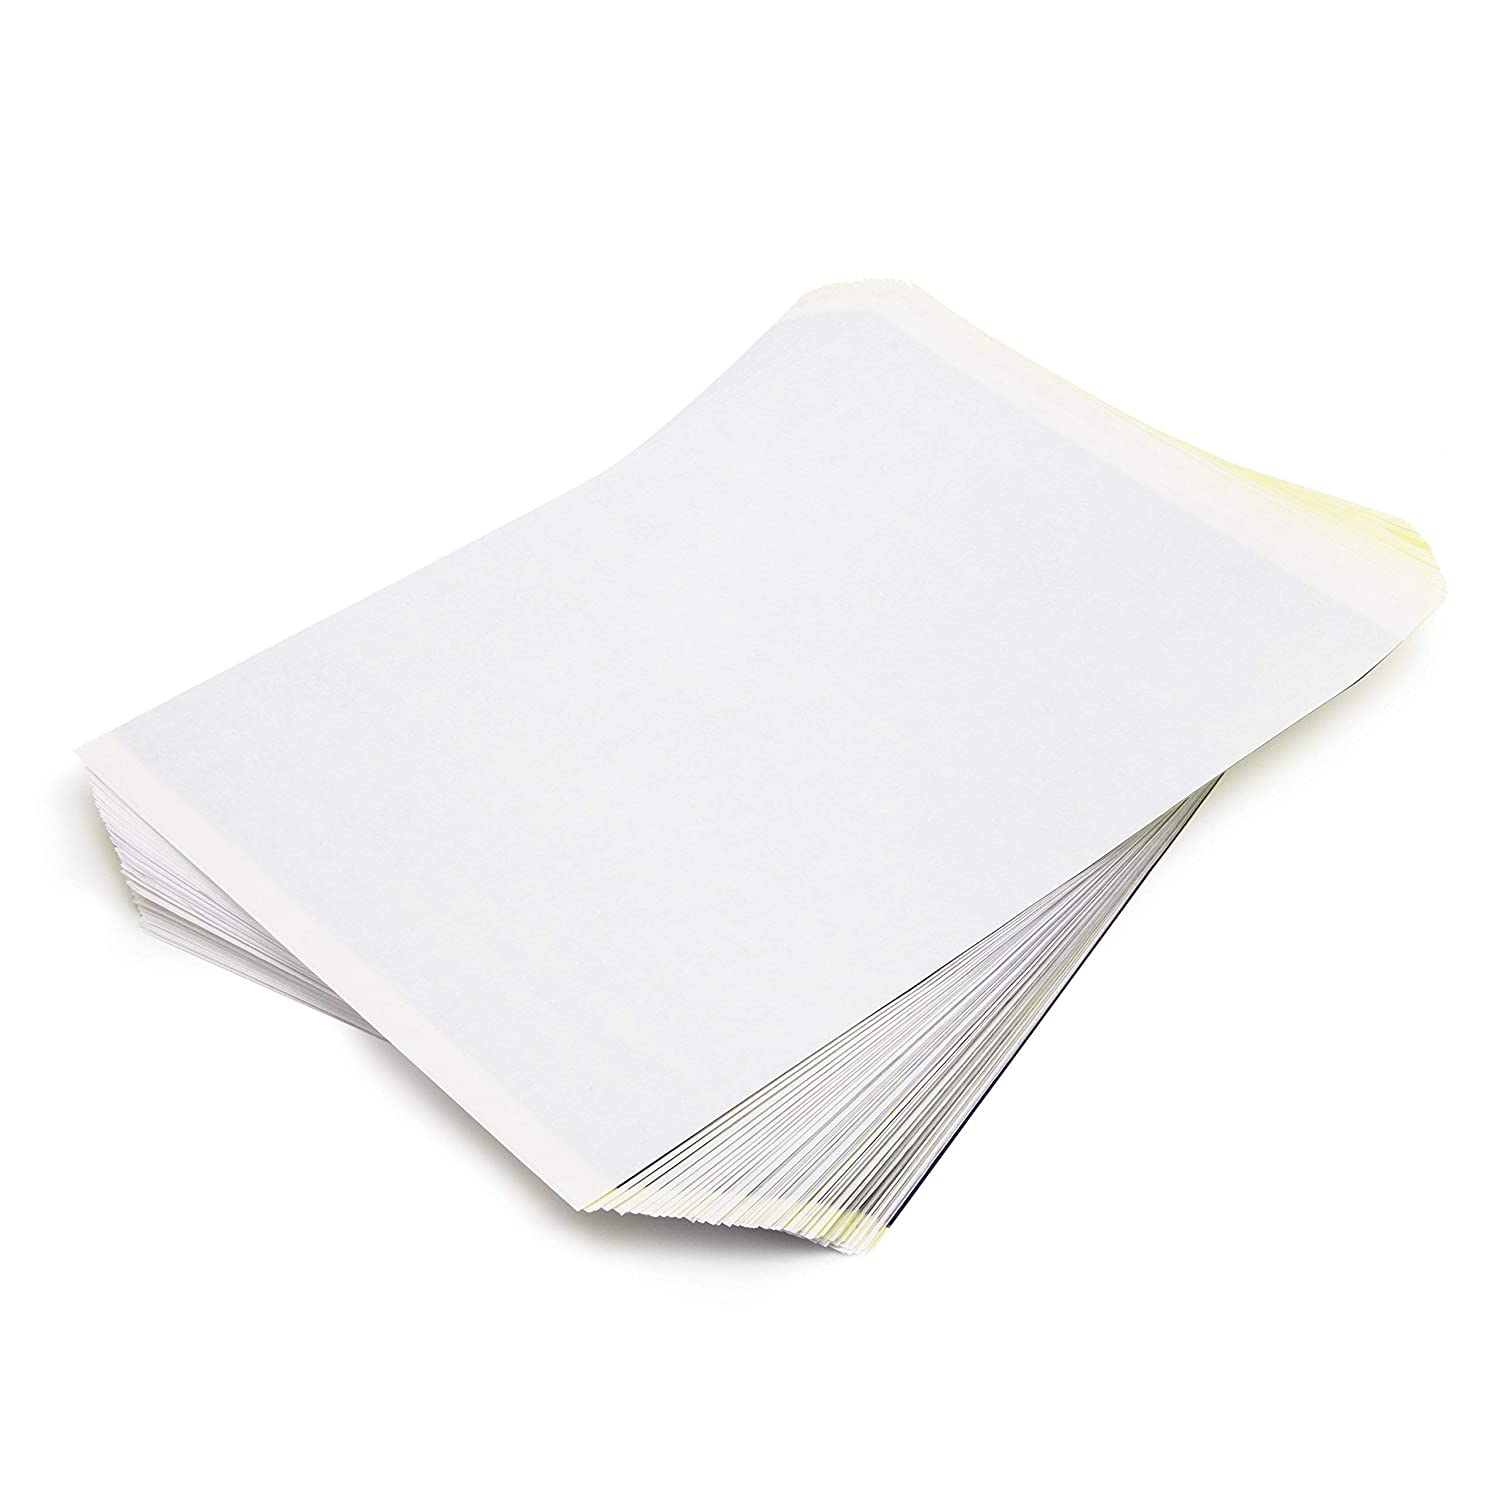 VLOXO 4 Layer Tattoo Transfer Paper A4 Size 30/100 Sheets